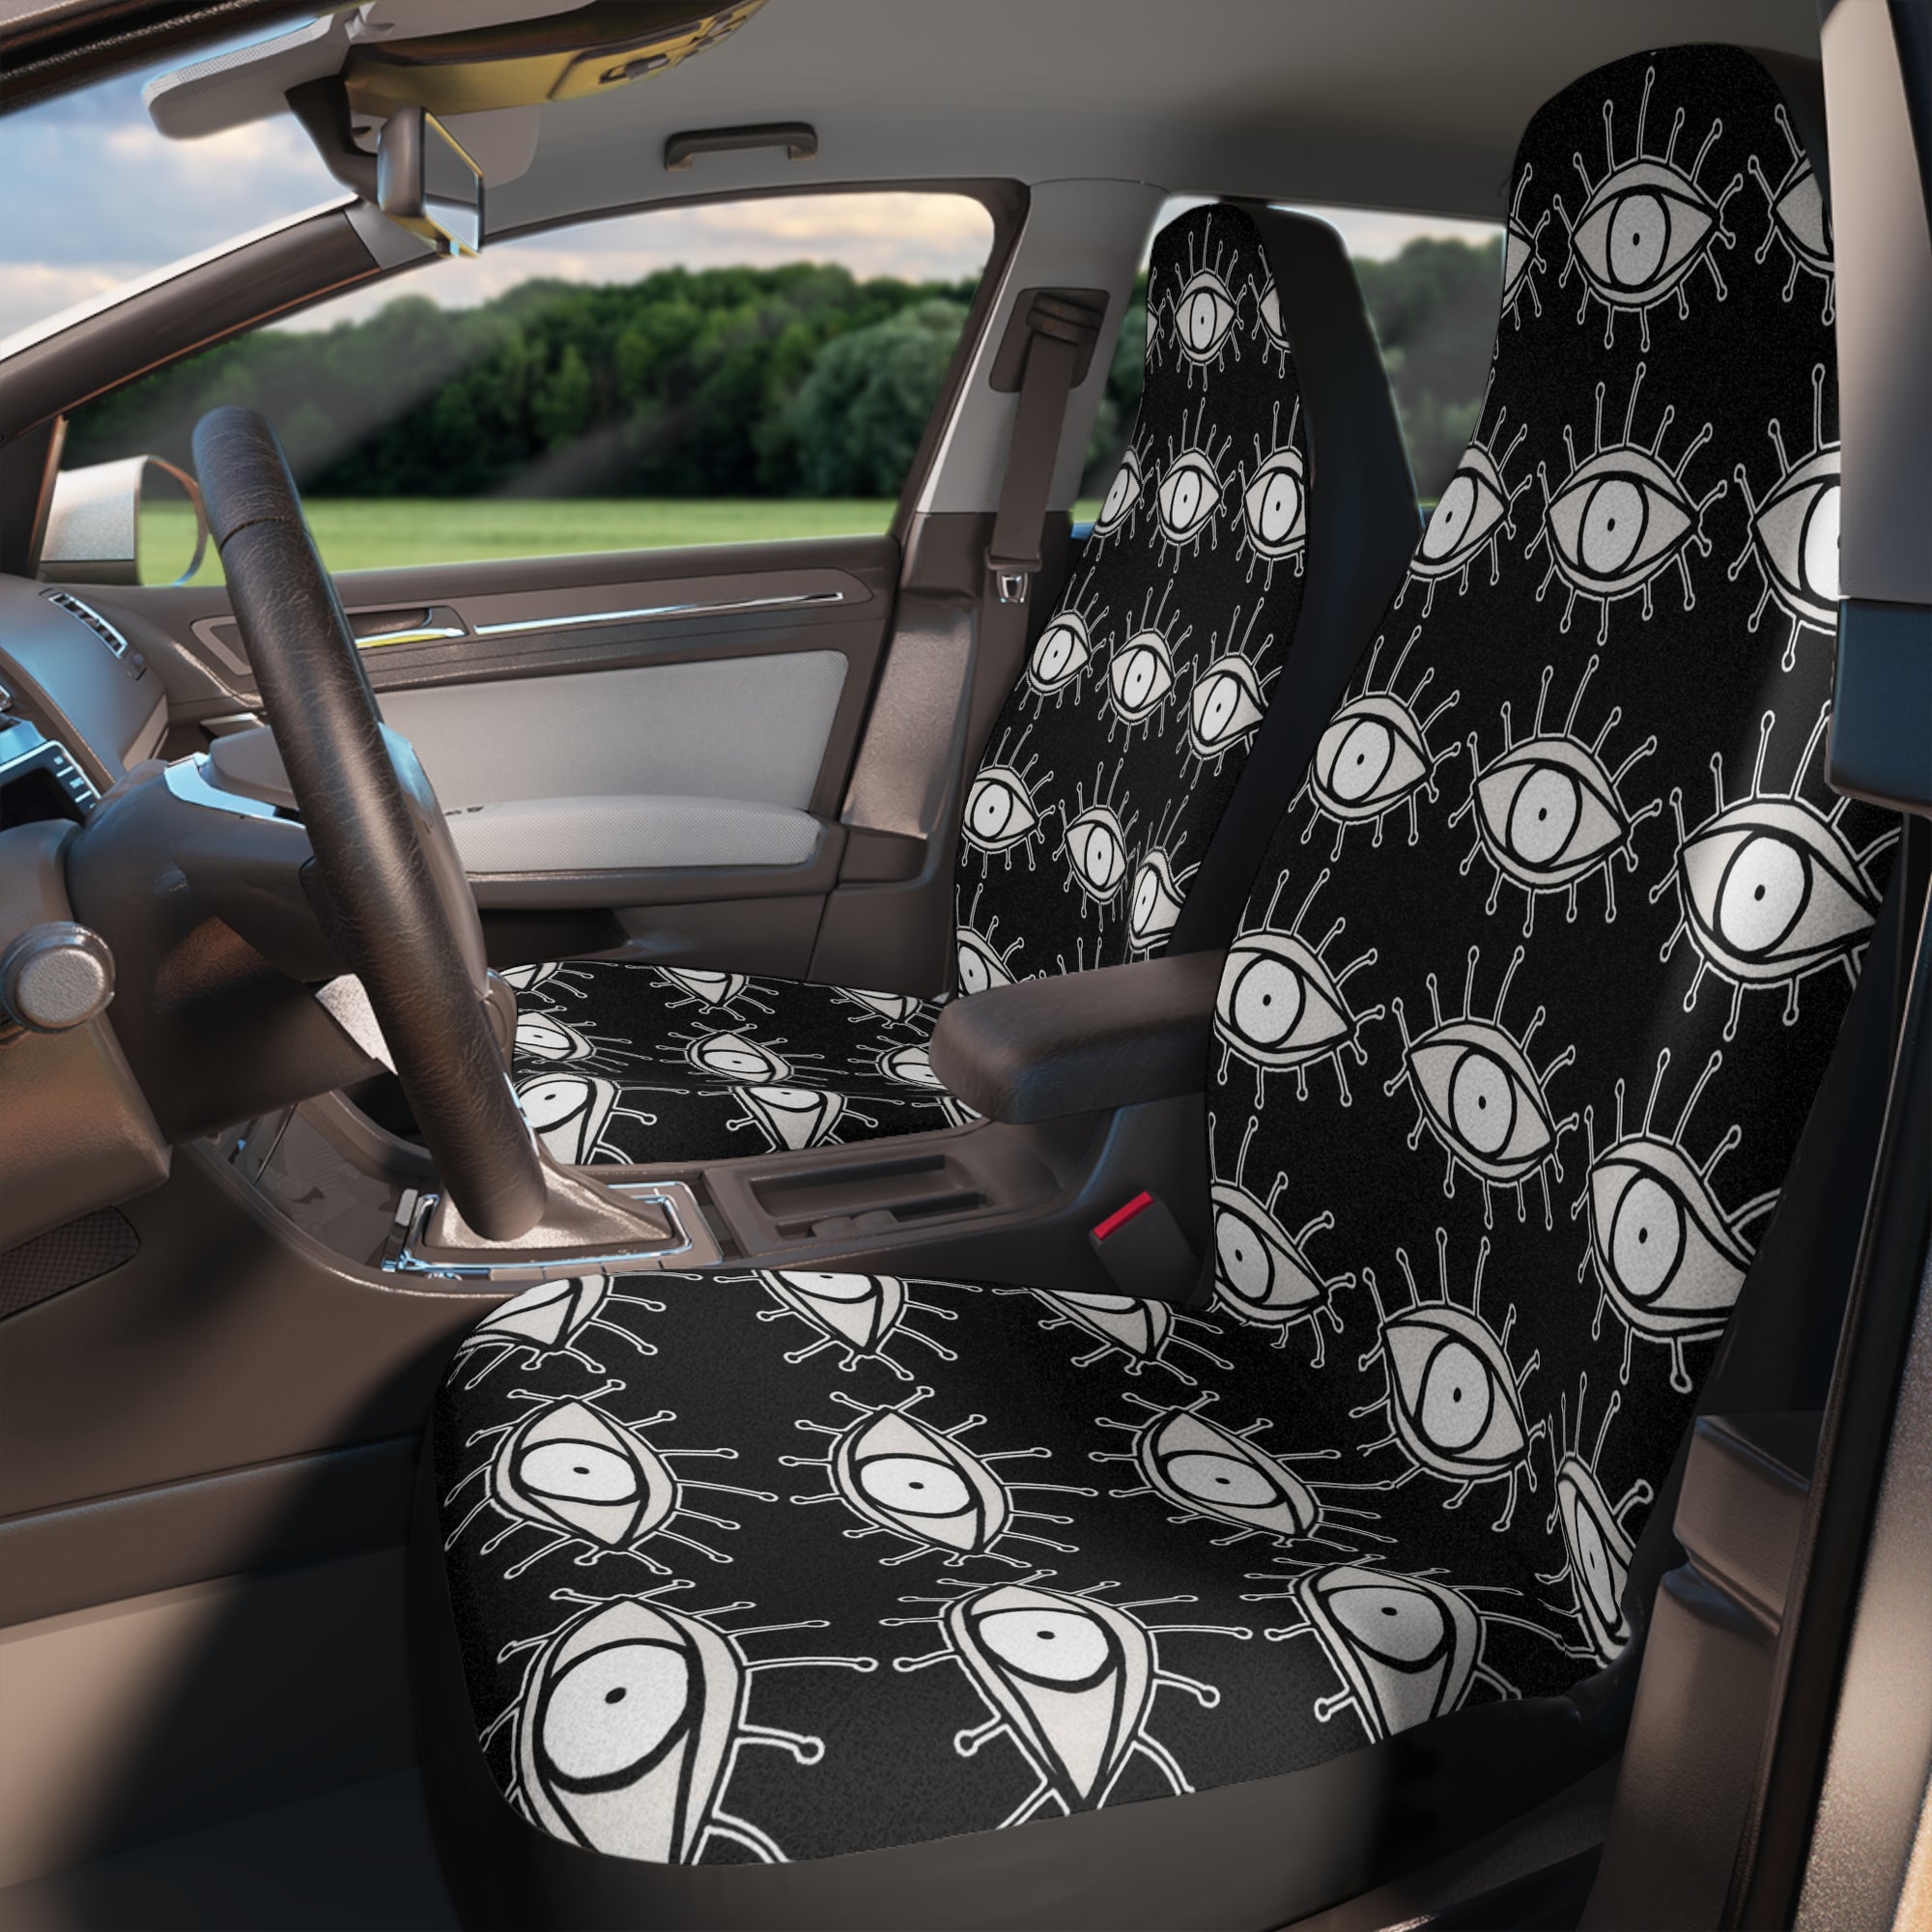 Eyes Gothic Pattern Artwork on Car Seat Covers "Lashes"